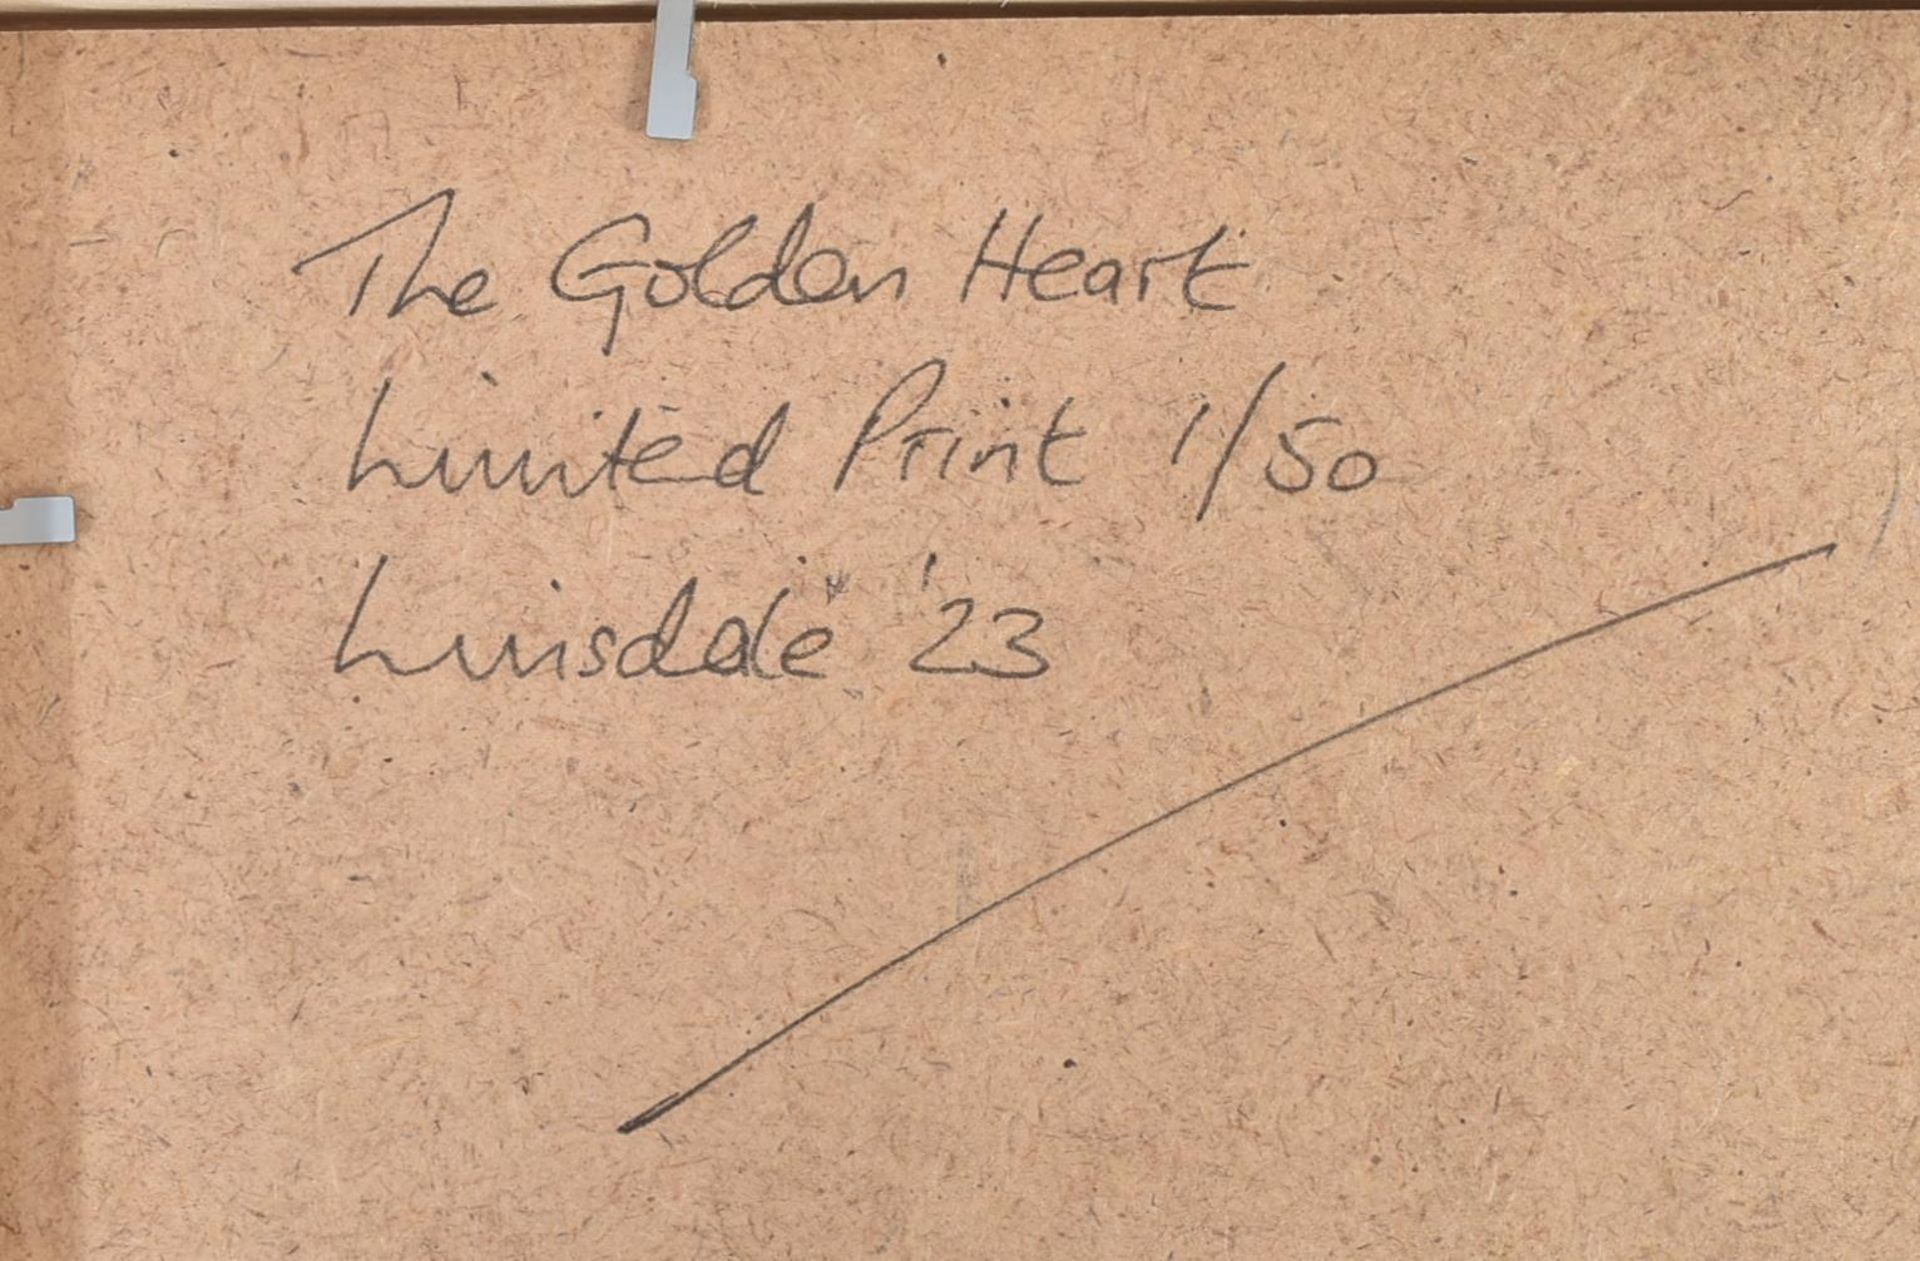 DAVID LINSDALE - THE GOLDEN HEART (1) - 2023 - Image 5 of 5